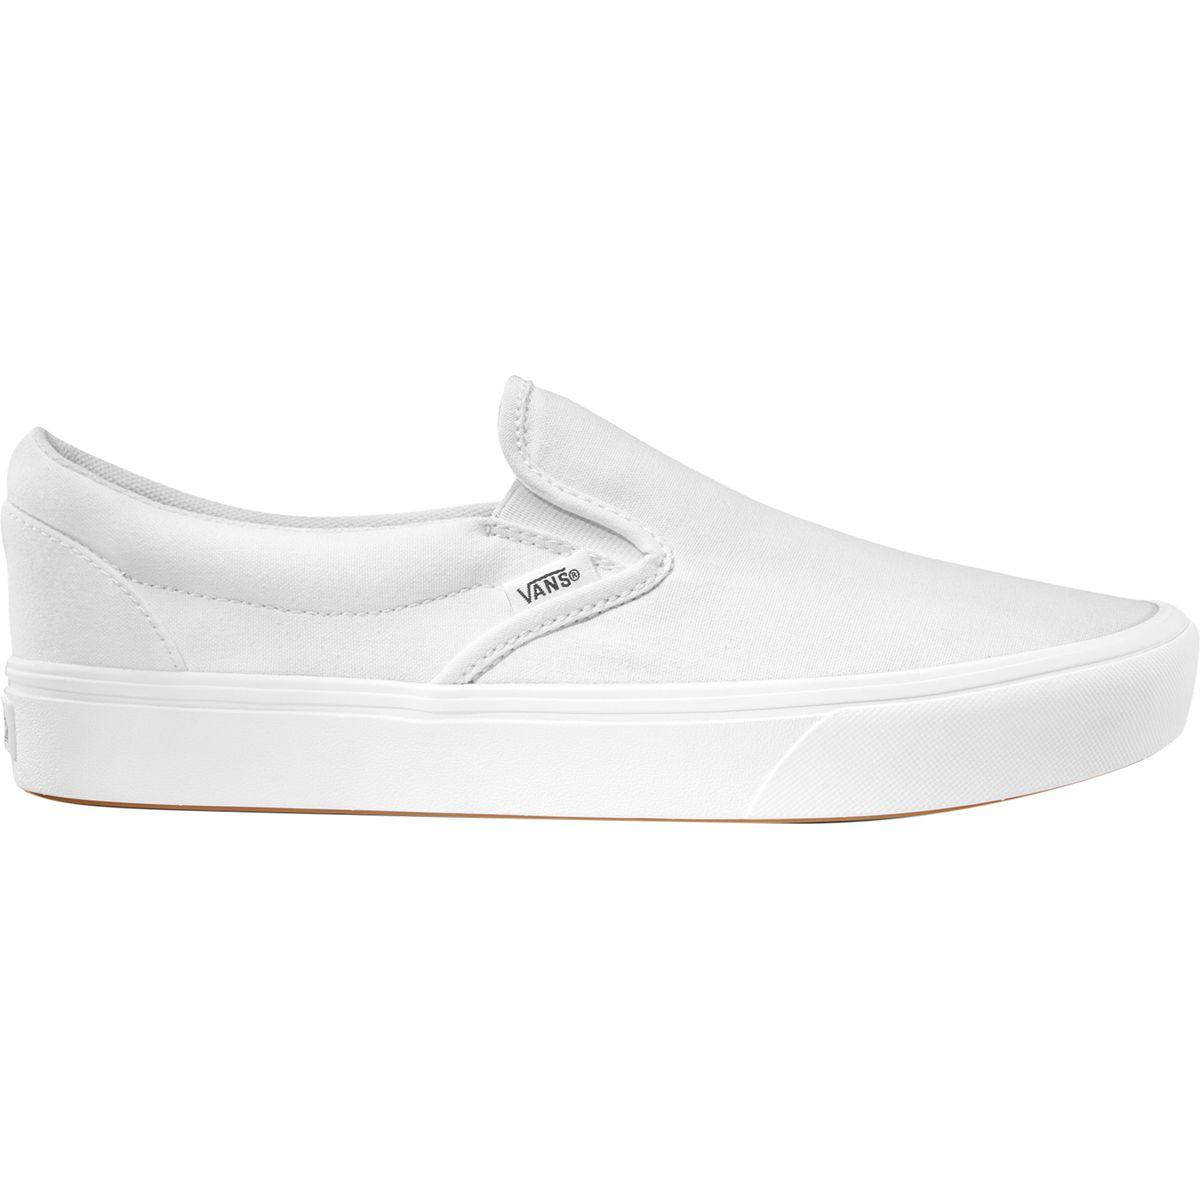 Vans S Classic Slip On Canvas Low Top Slip On in White - Lyst